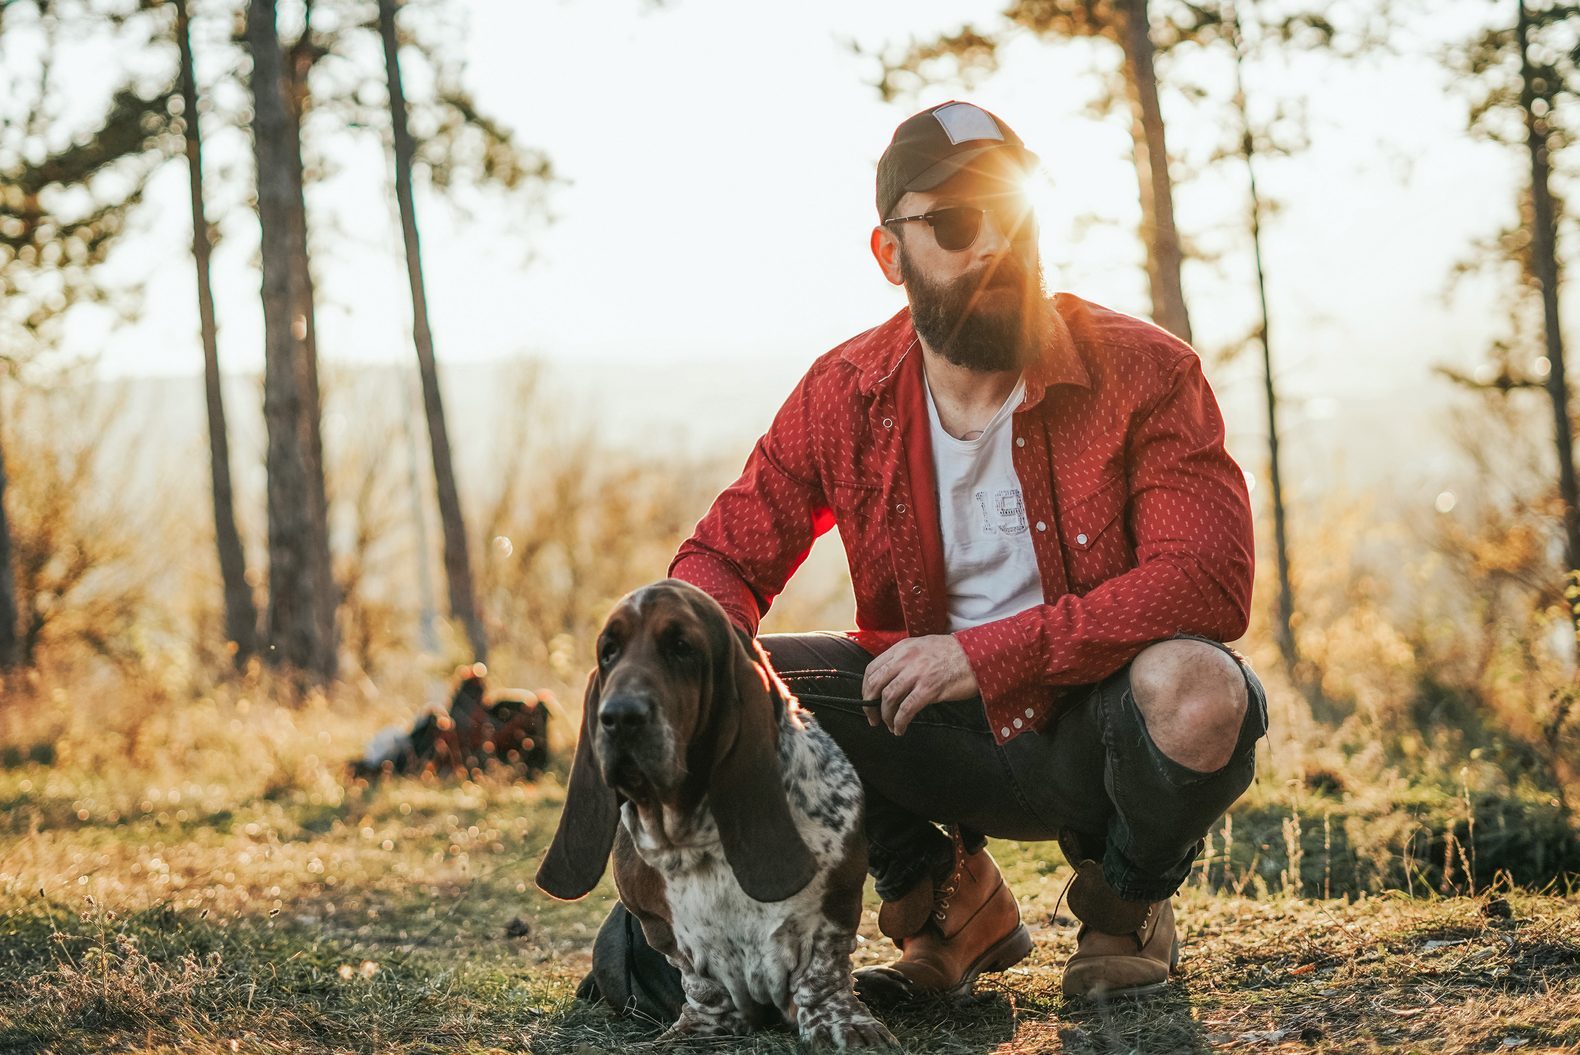 Portrait of Bearded man with a basset hound dog in nature